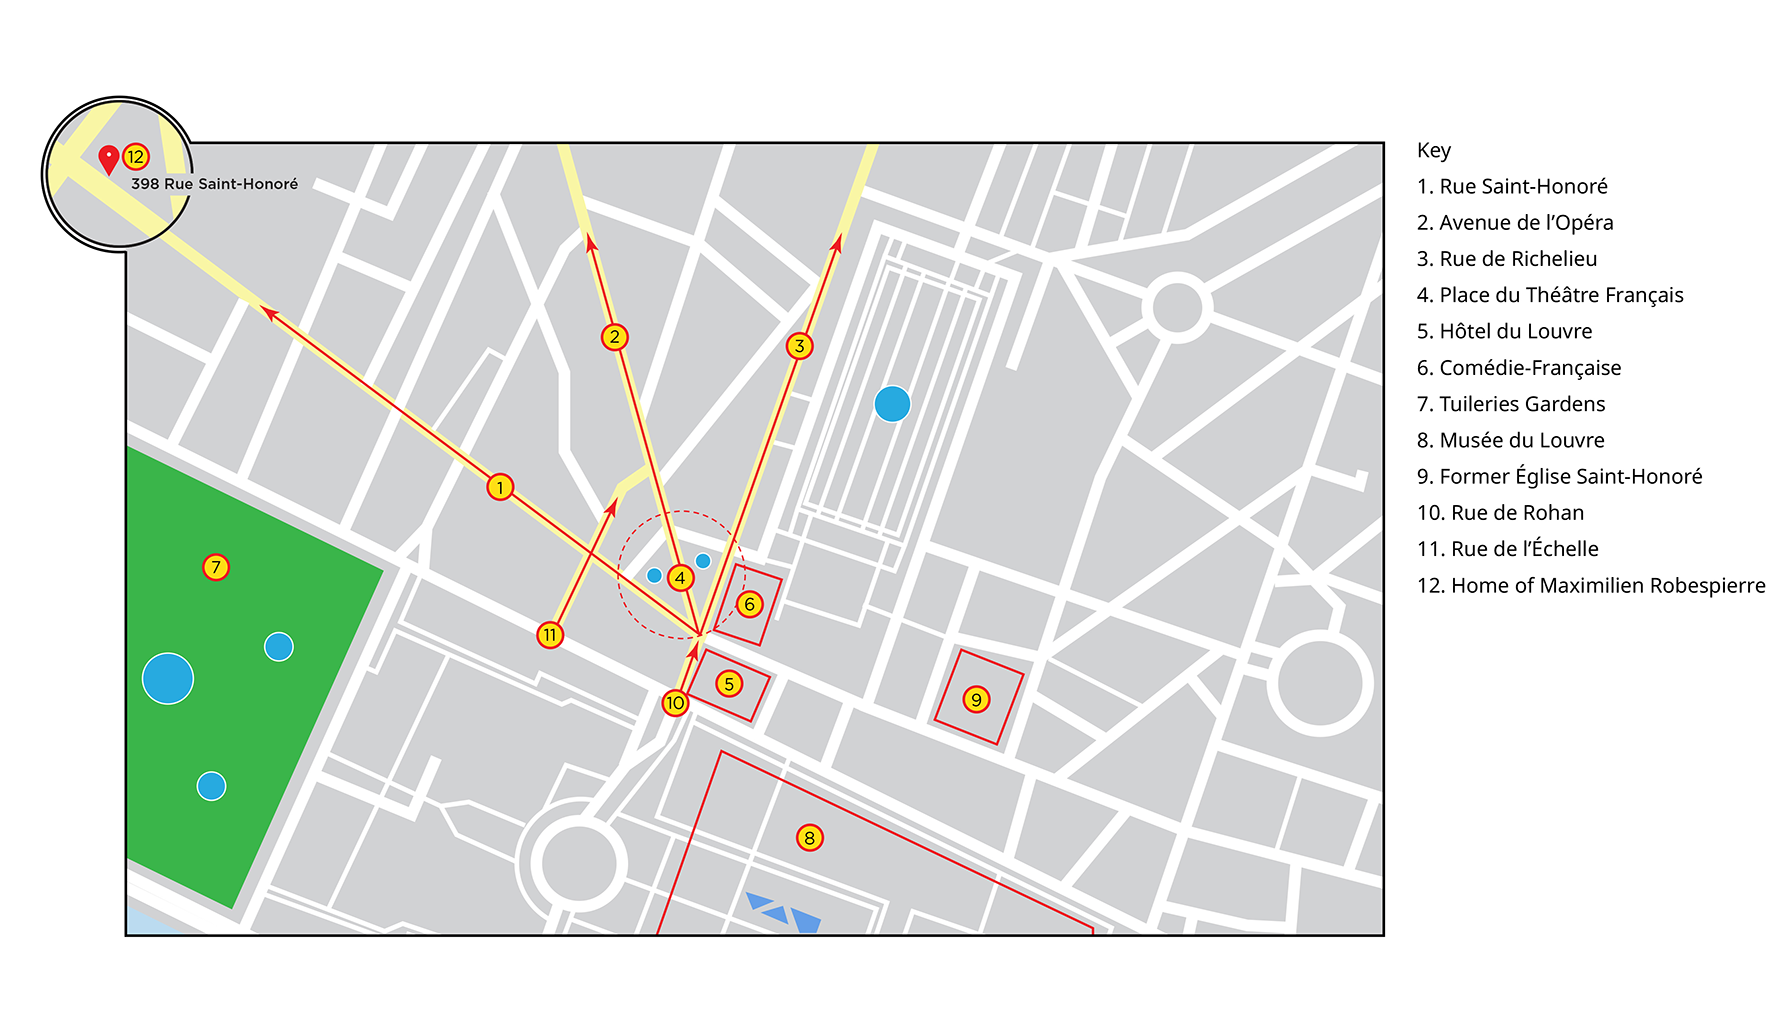 An image depicting a gray map of an urban area. On the map are red arrows and boxes which mark off certain areas in the map. The roads are made up with white lines while the buildings and urban environments are made up with gray. Outside of the map is a key with titles of areas marked.